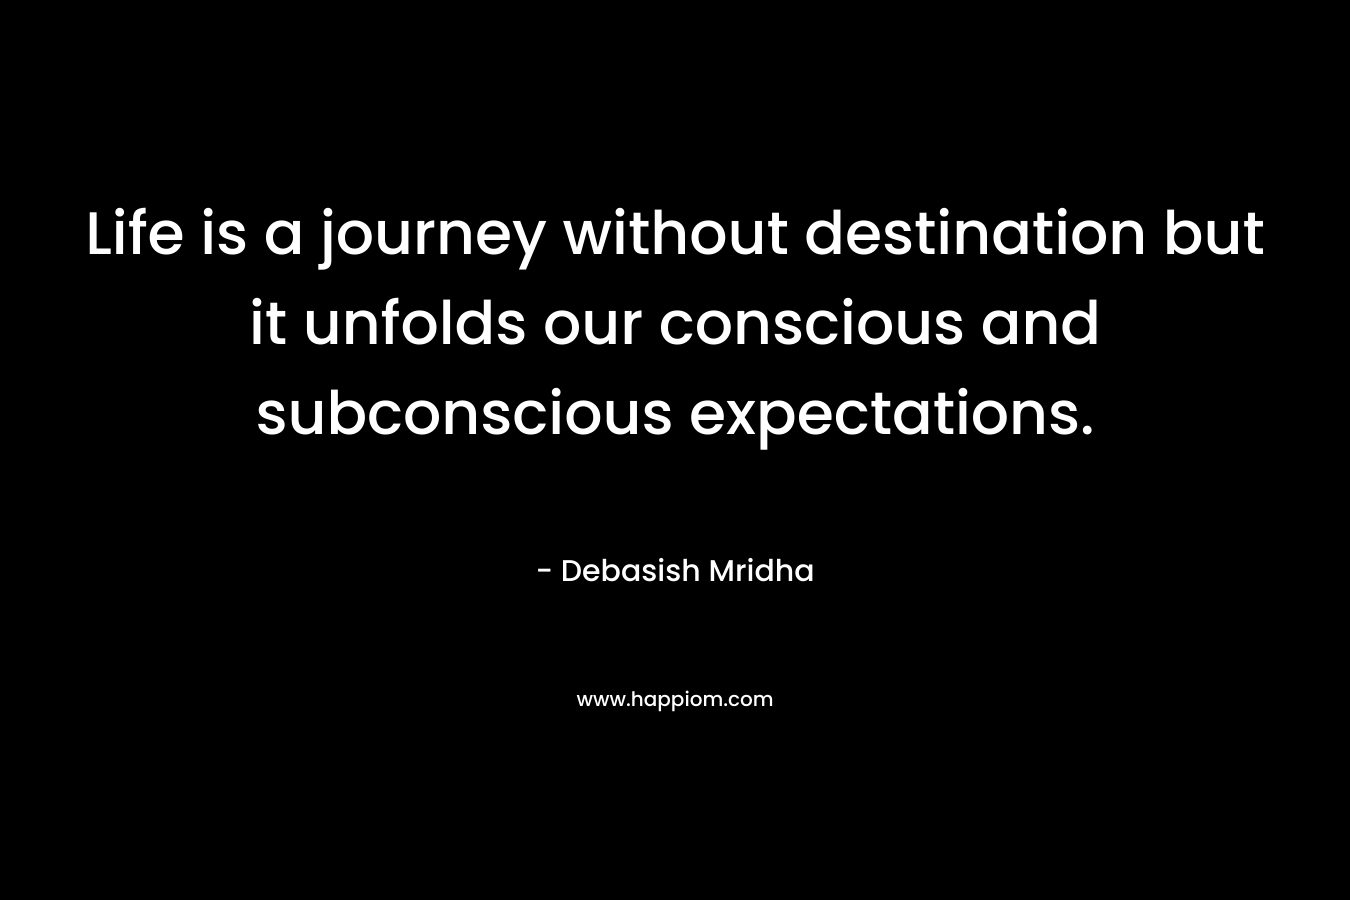 Life is a journey without destination but it unfolds our conscious and subconscious expectations.